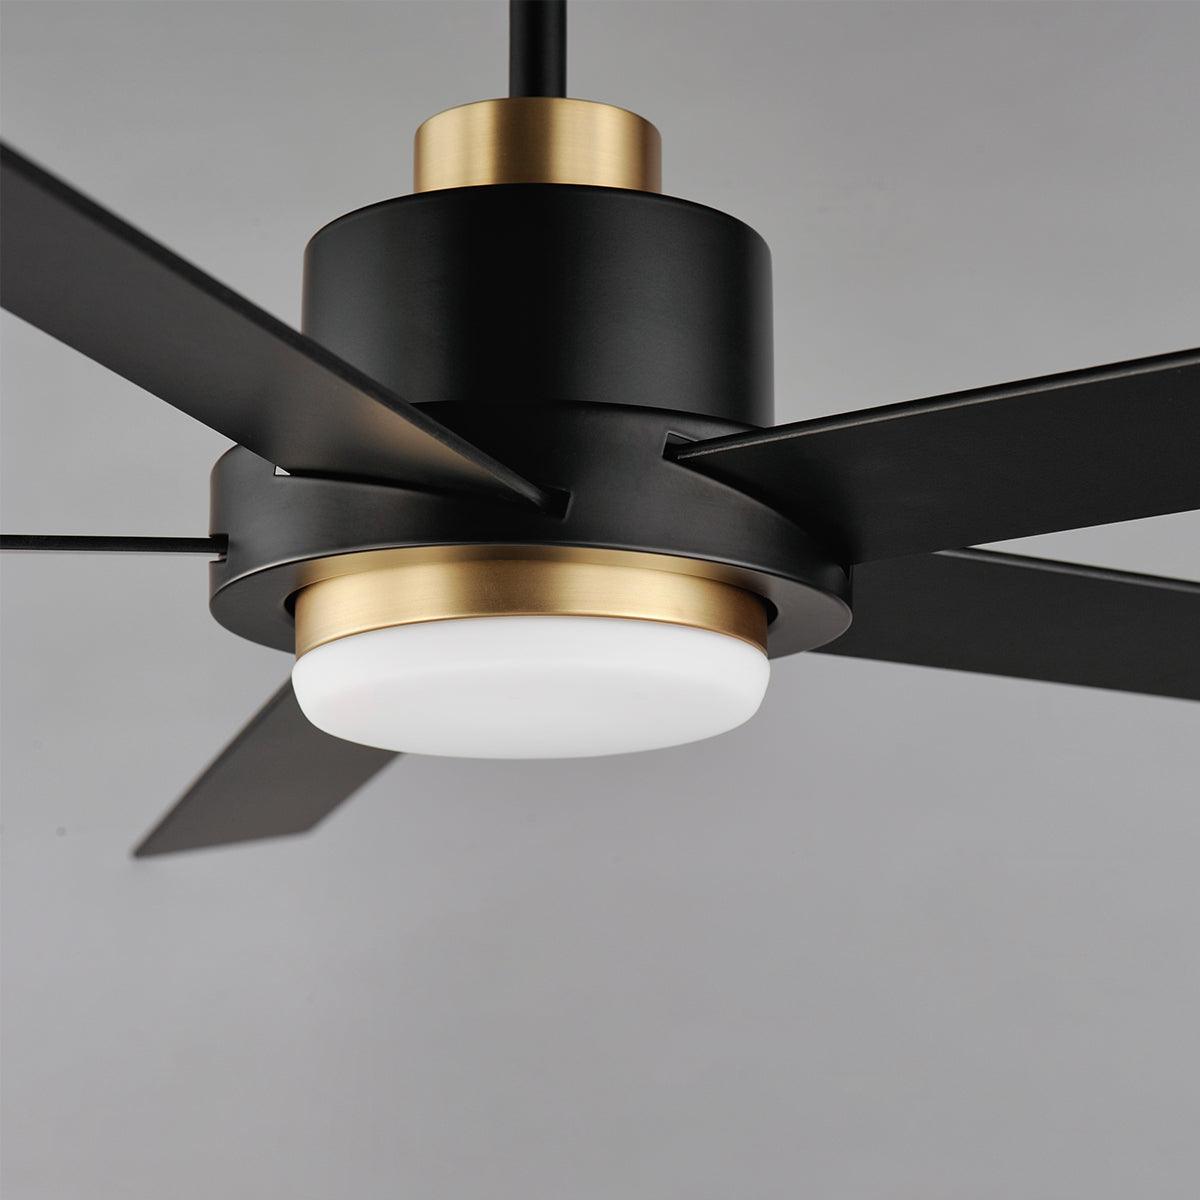 Daisy 60 Inch 5-Blade Ceiling Fan With Light and Wall Control, Black,Gold with Black Blades - Bees Lighting